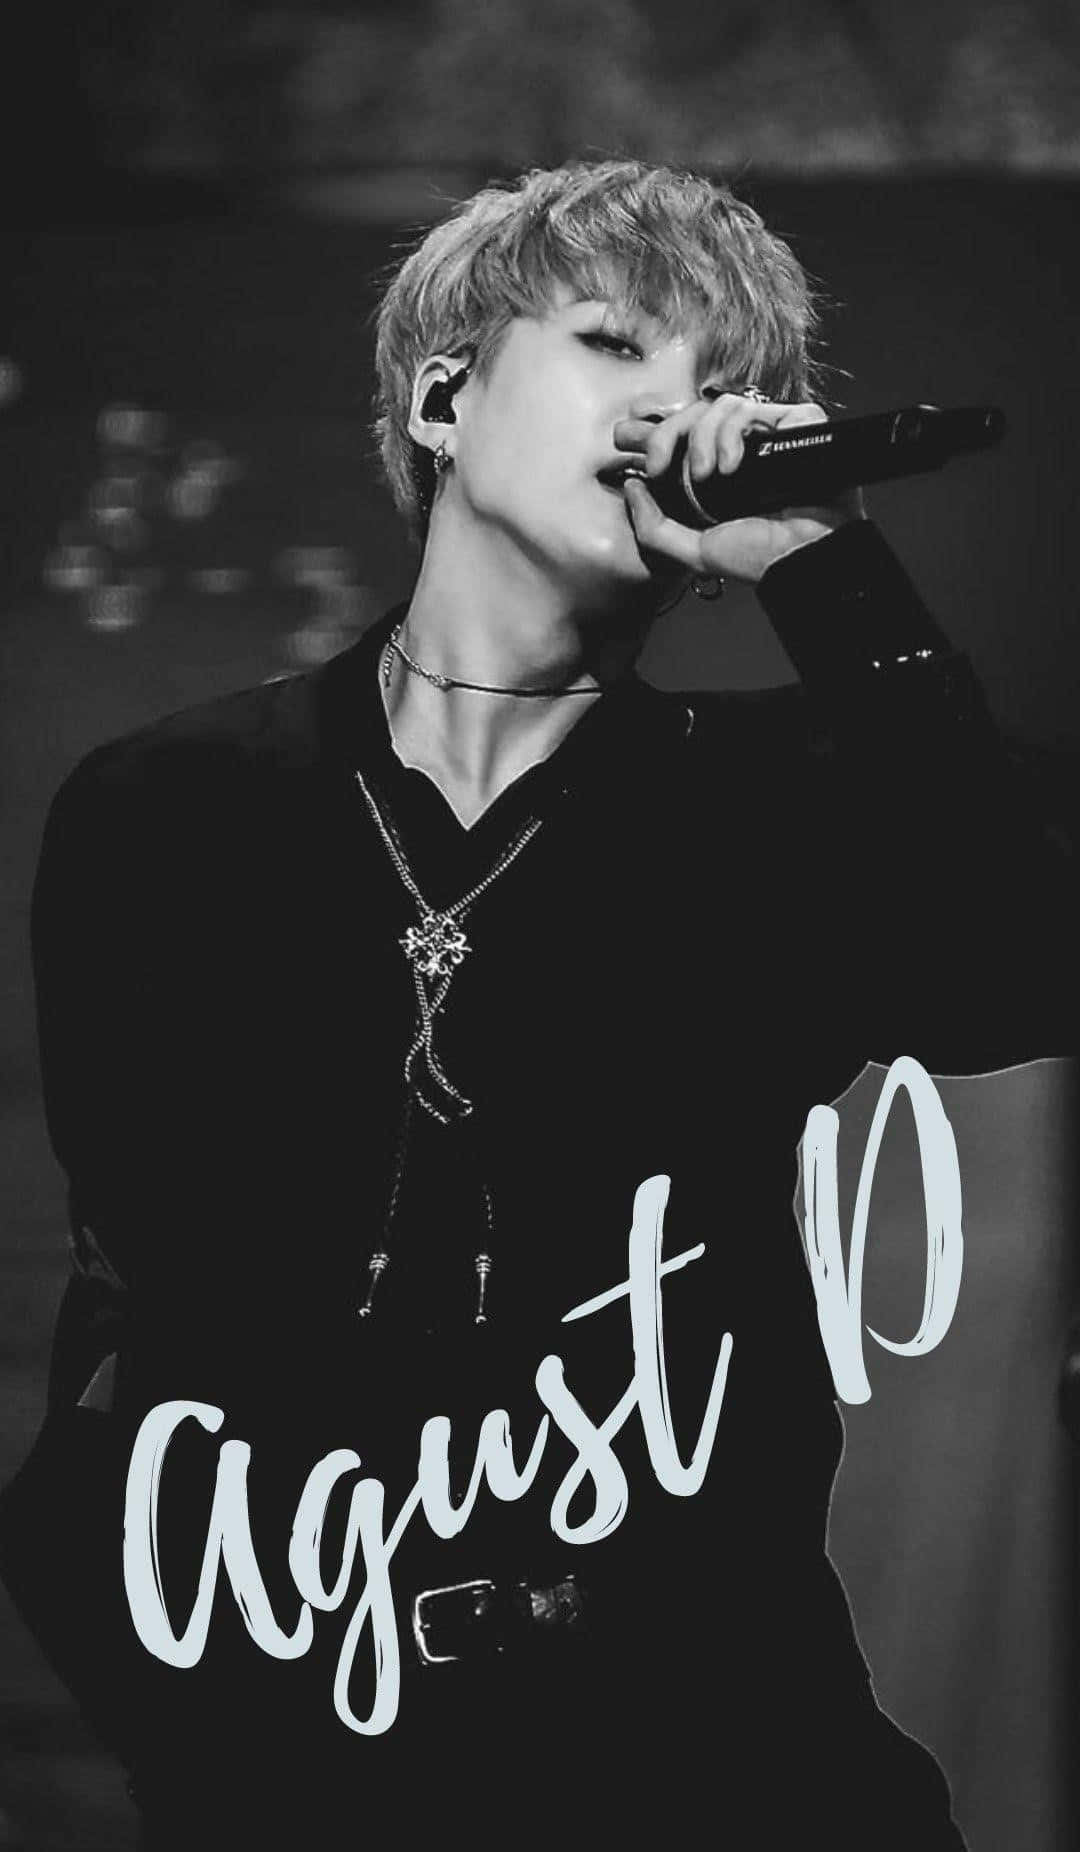 Agust D in action – The powerful music sensation Wallpaper